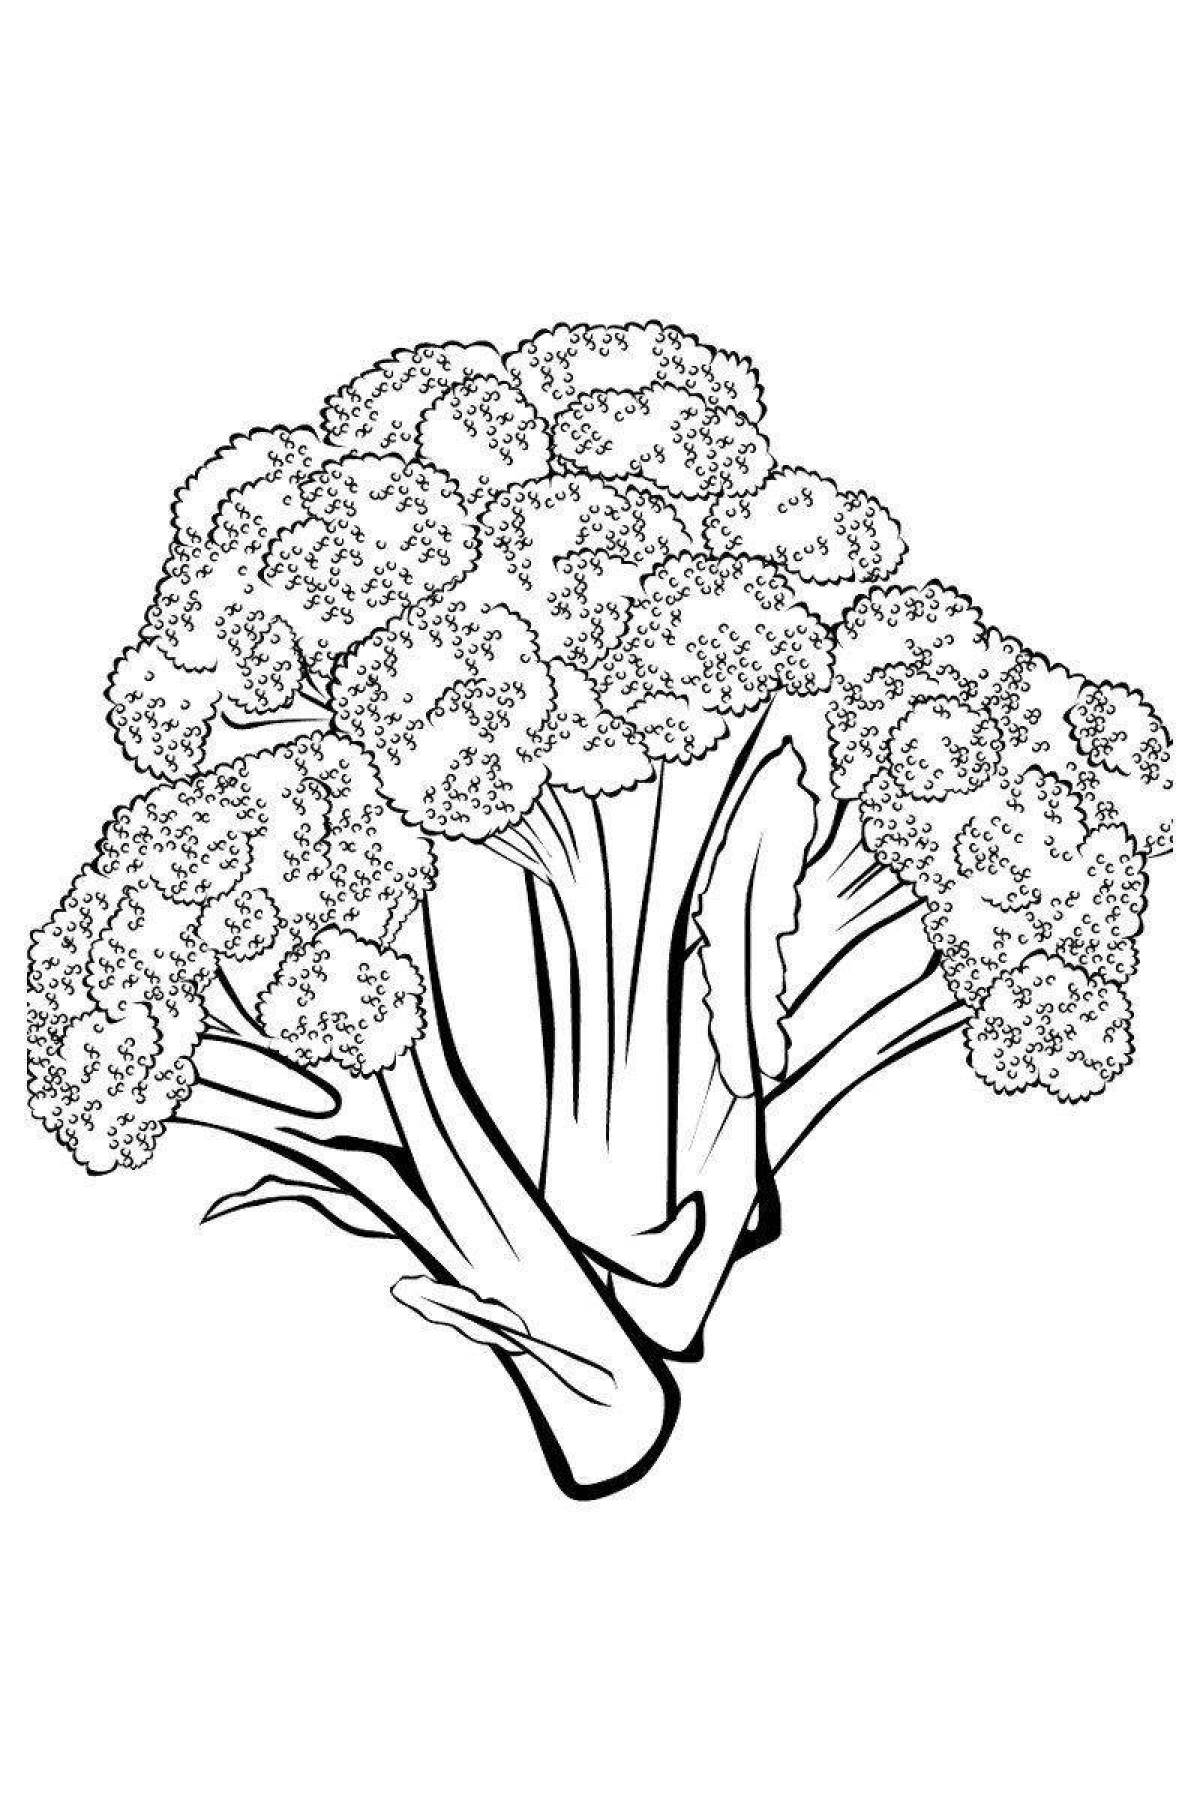 Awesome cauliflower coloring page